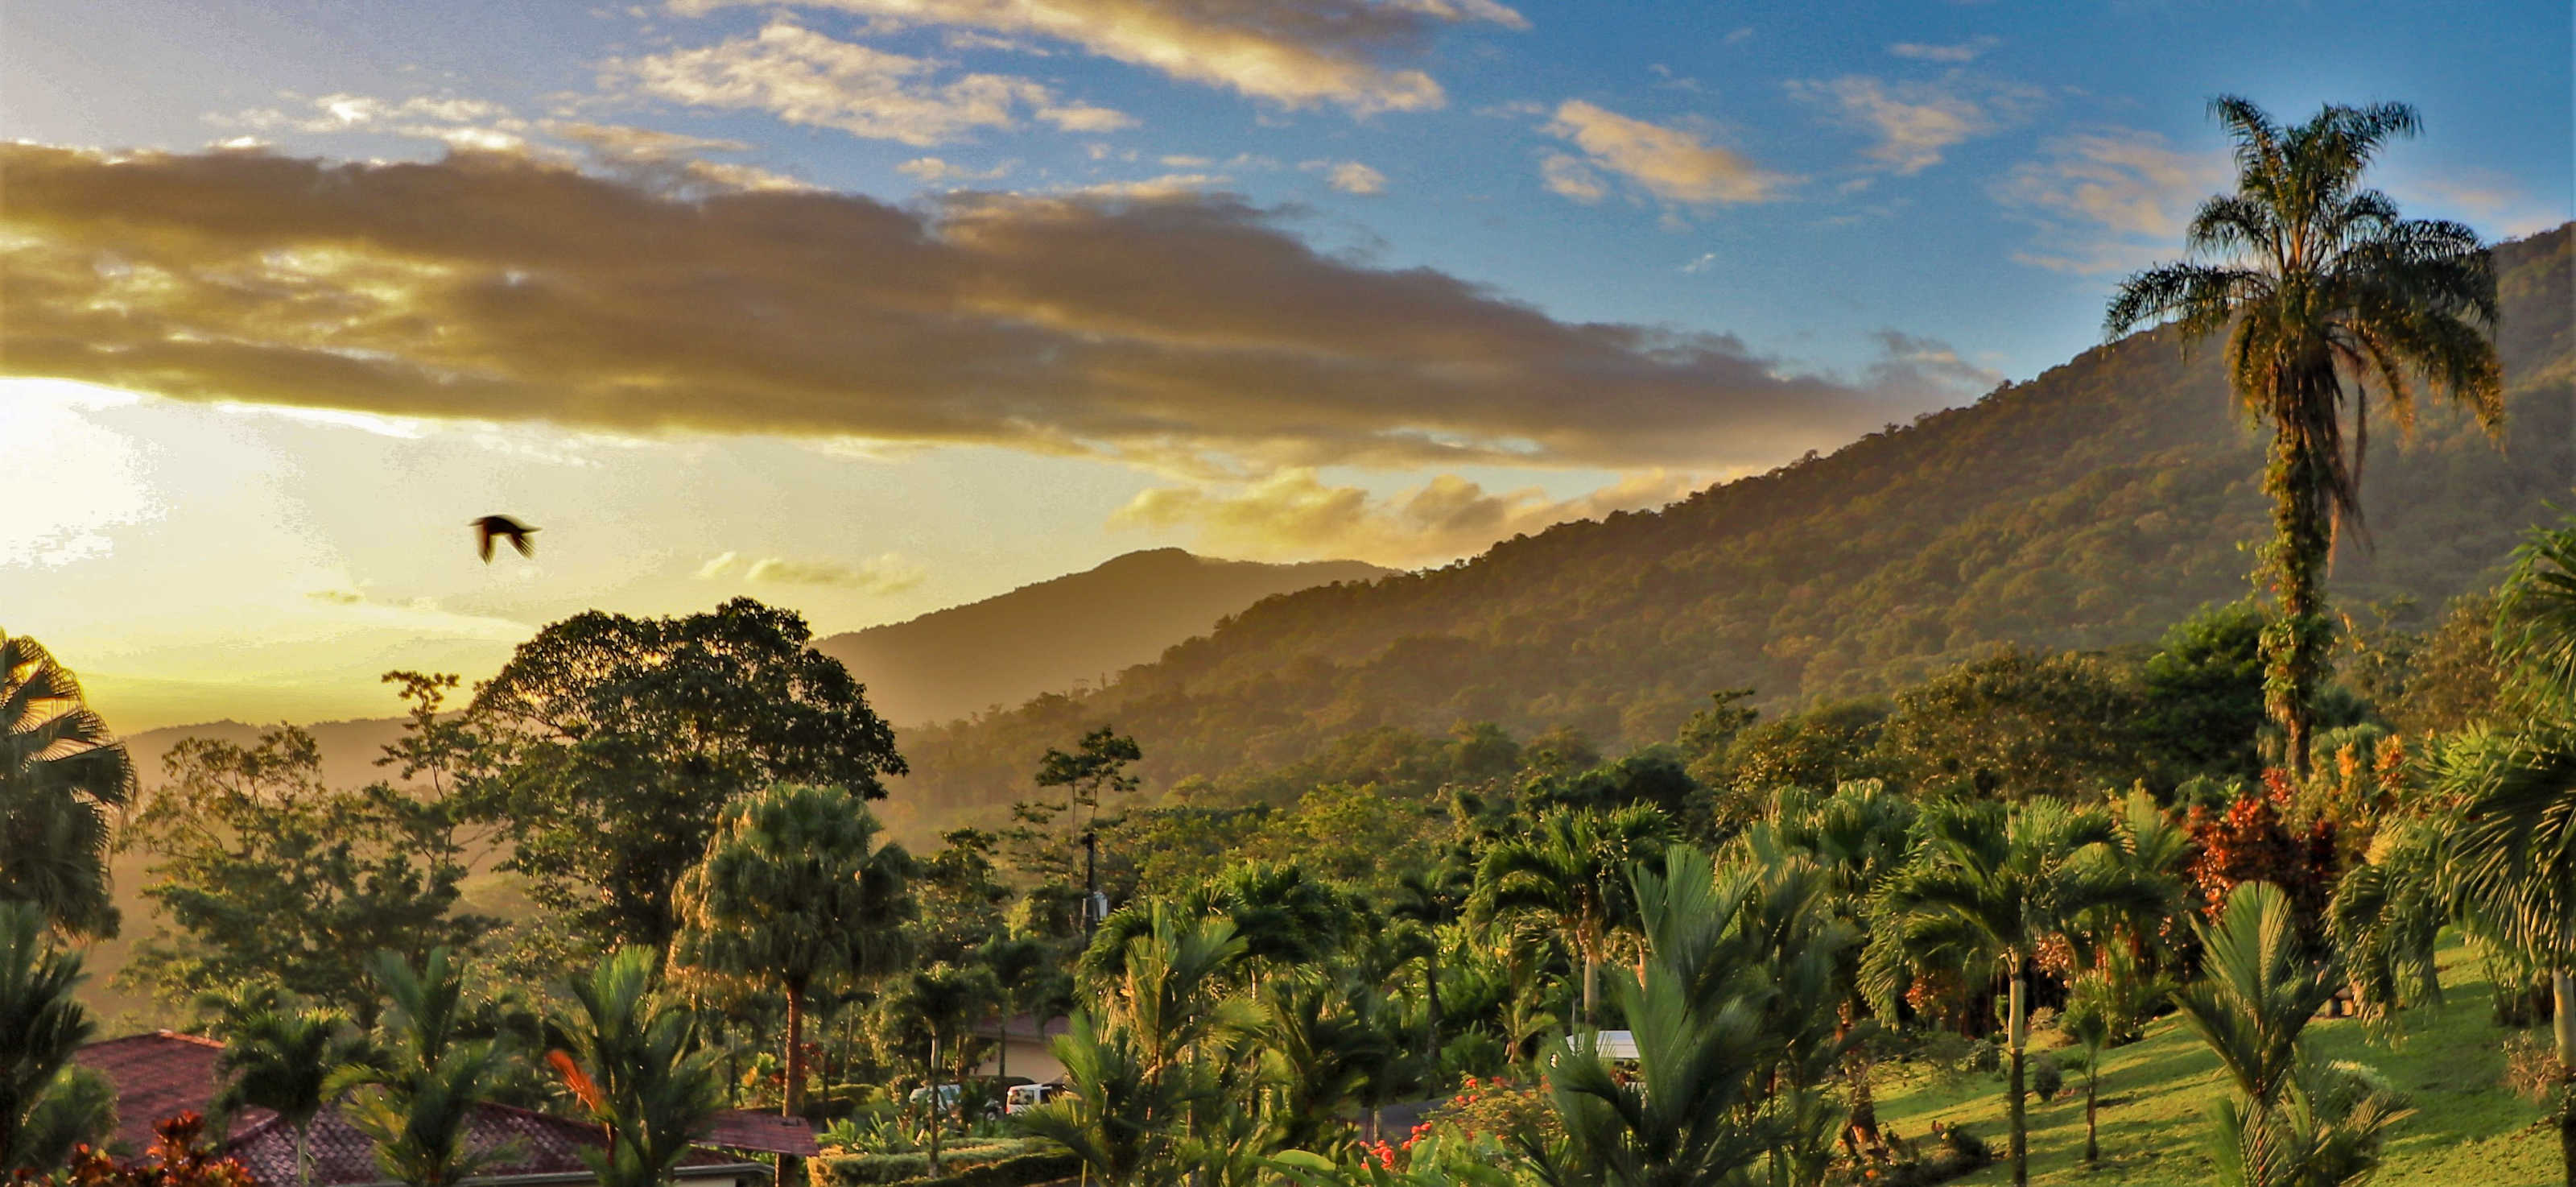 The Best Costa Rica Tours for 2021, Tailor-Made | Tourlane